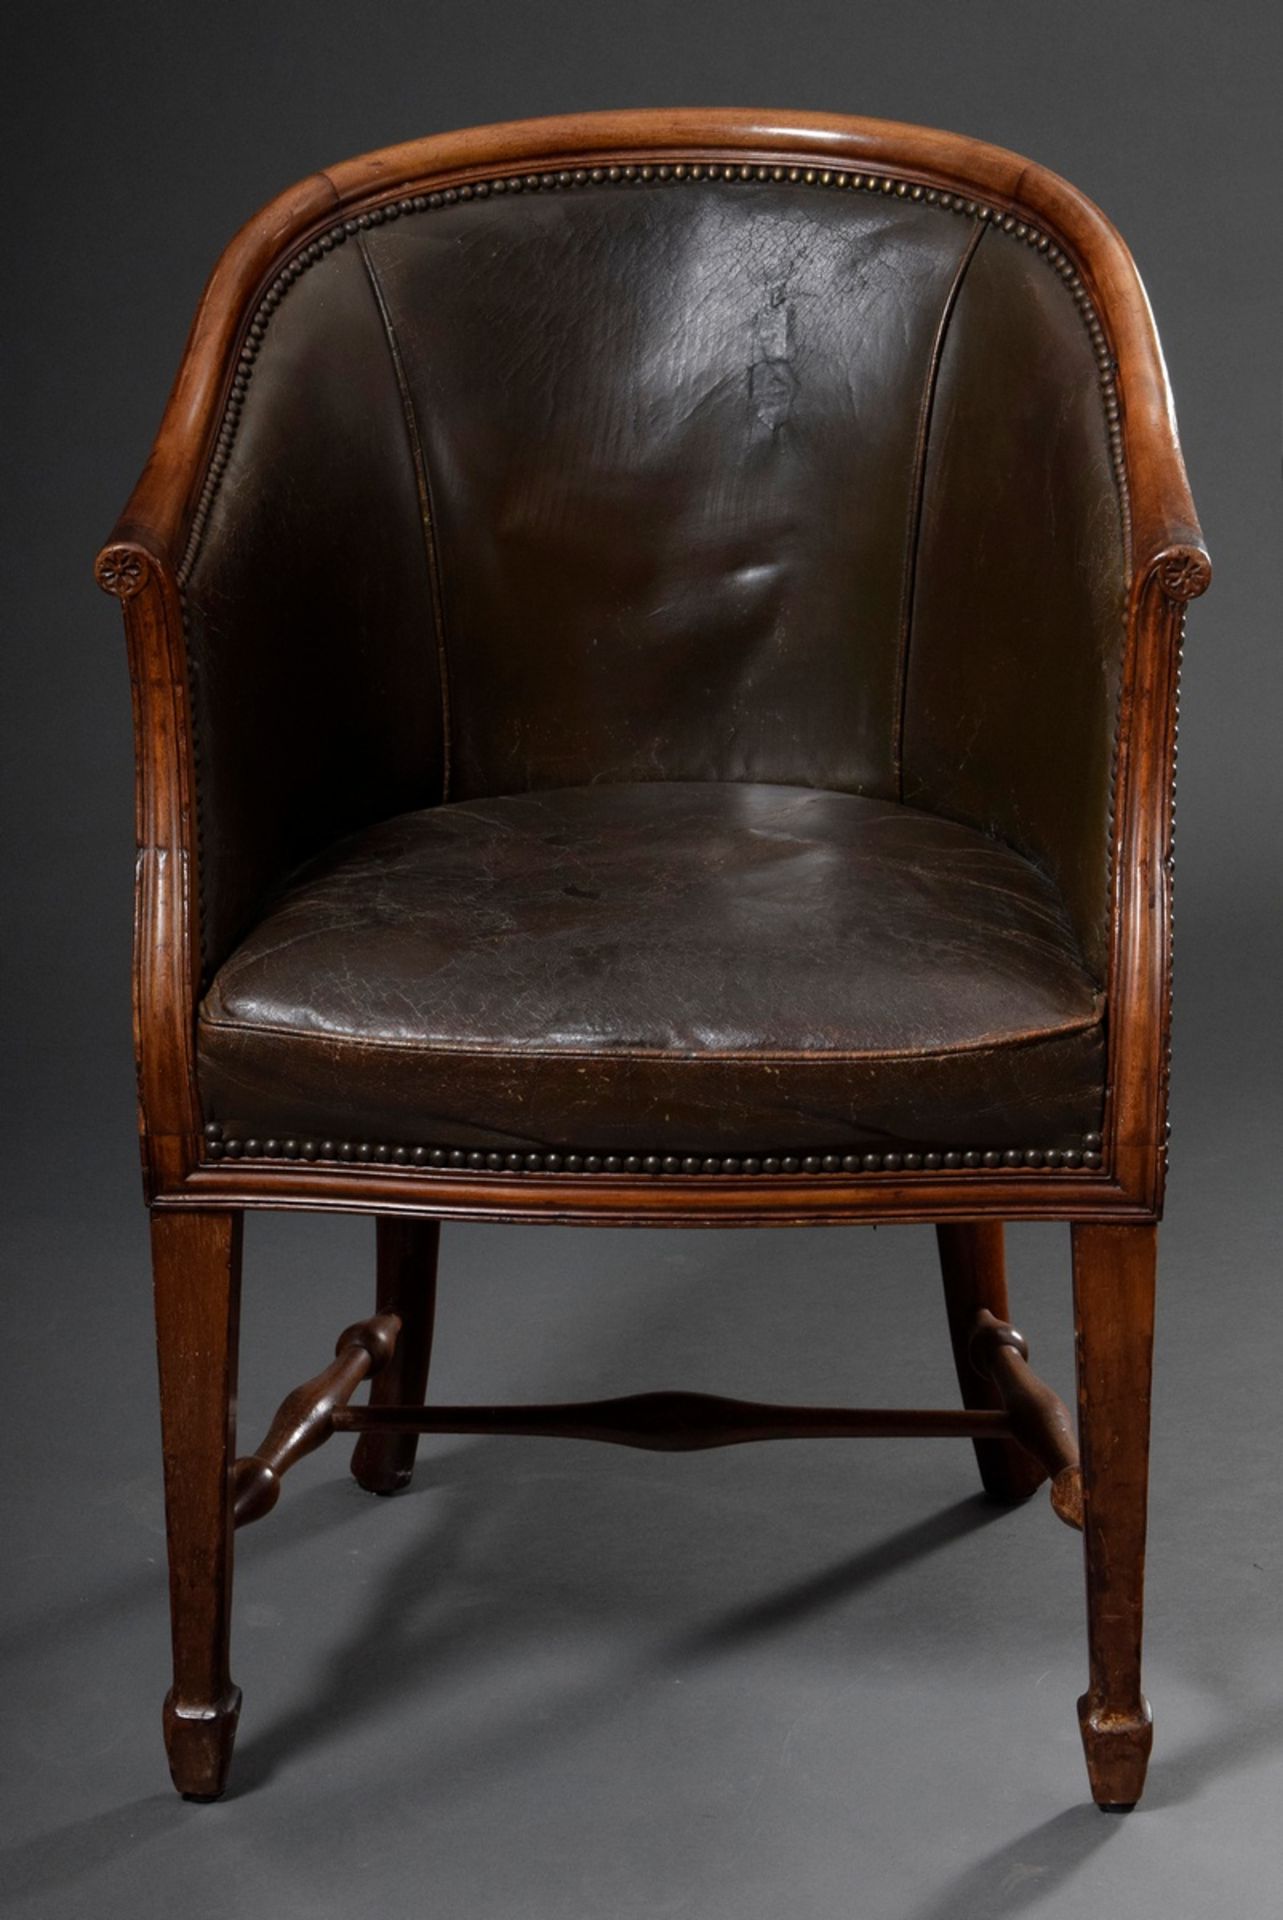 English "Tub Chair" with finely carved mahogany frame and original green leather upholstery, Englan - Image 2 of 3